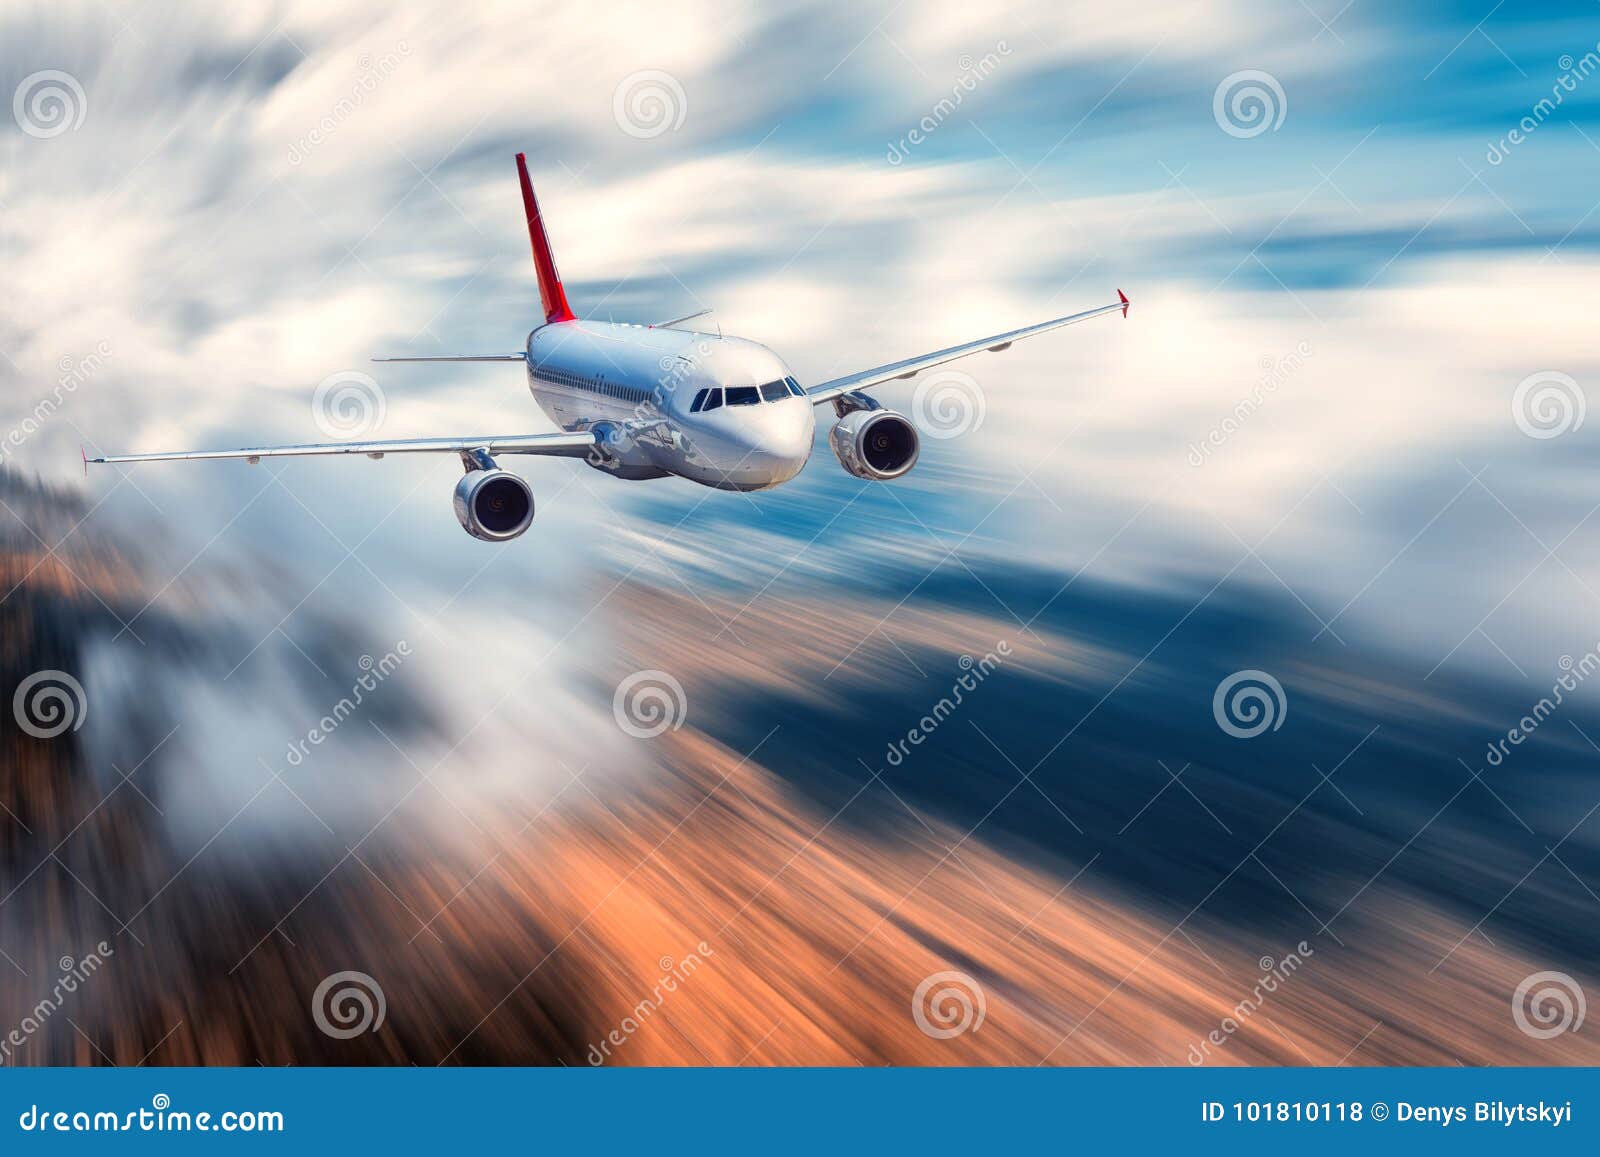 flying passenger airplane and blurred background